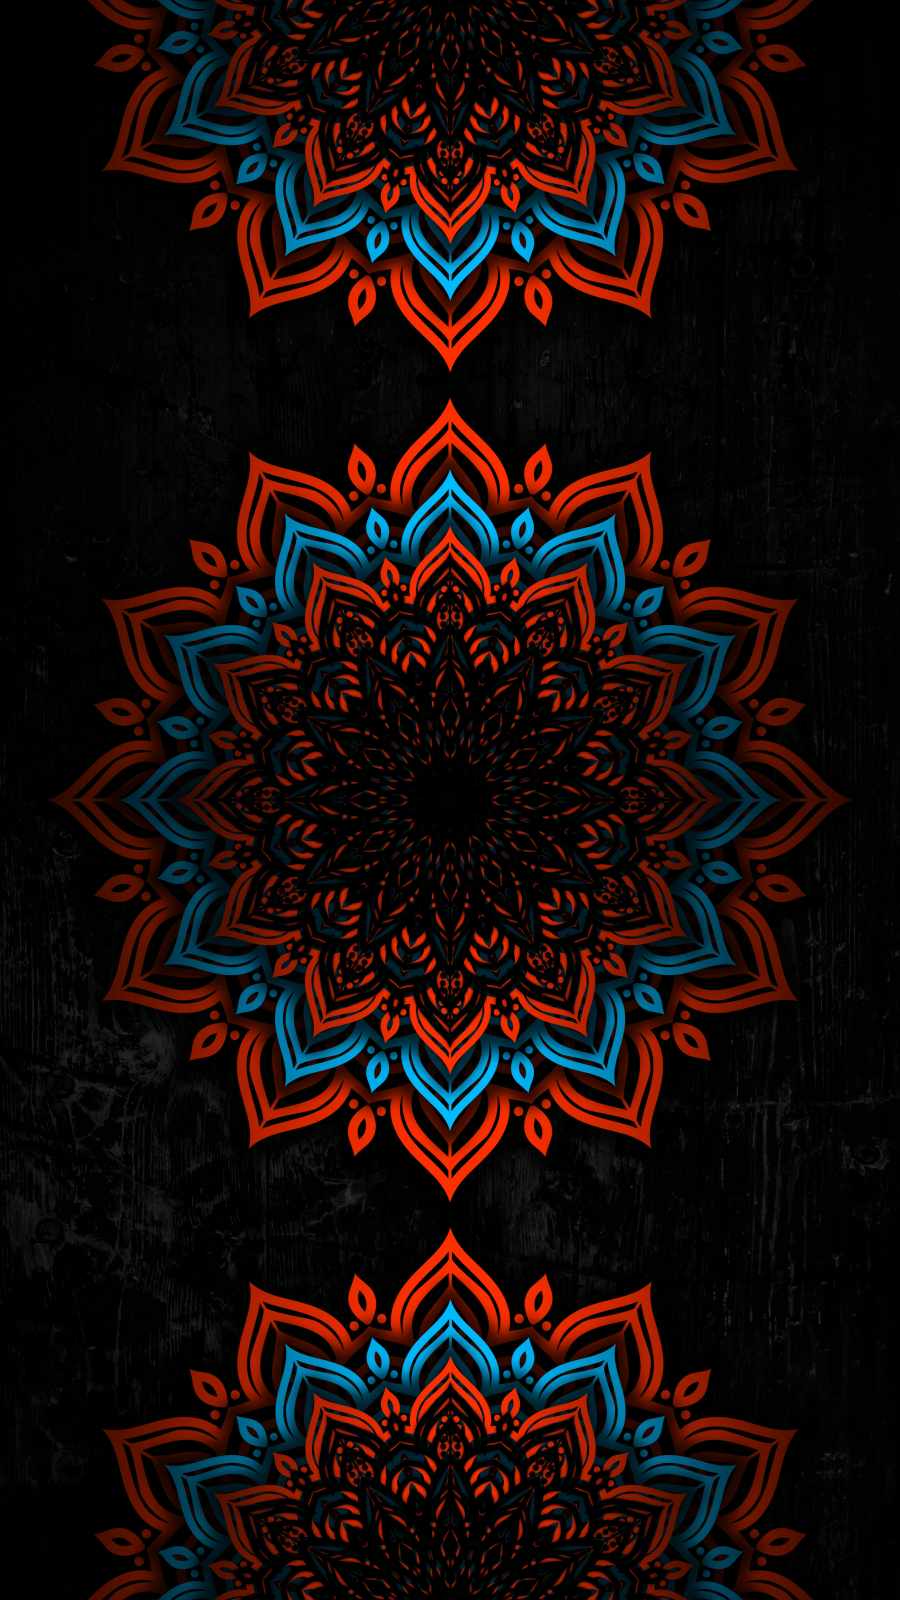 Floral Designs IPhone Wallpaper  IPhone Wallpapers